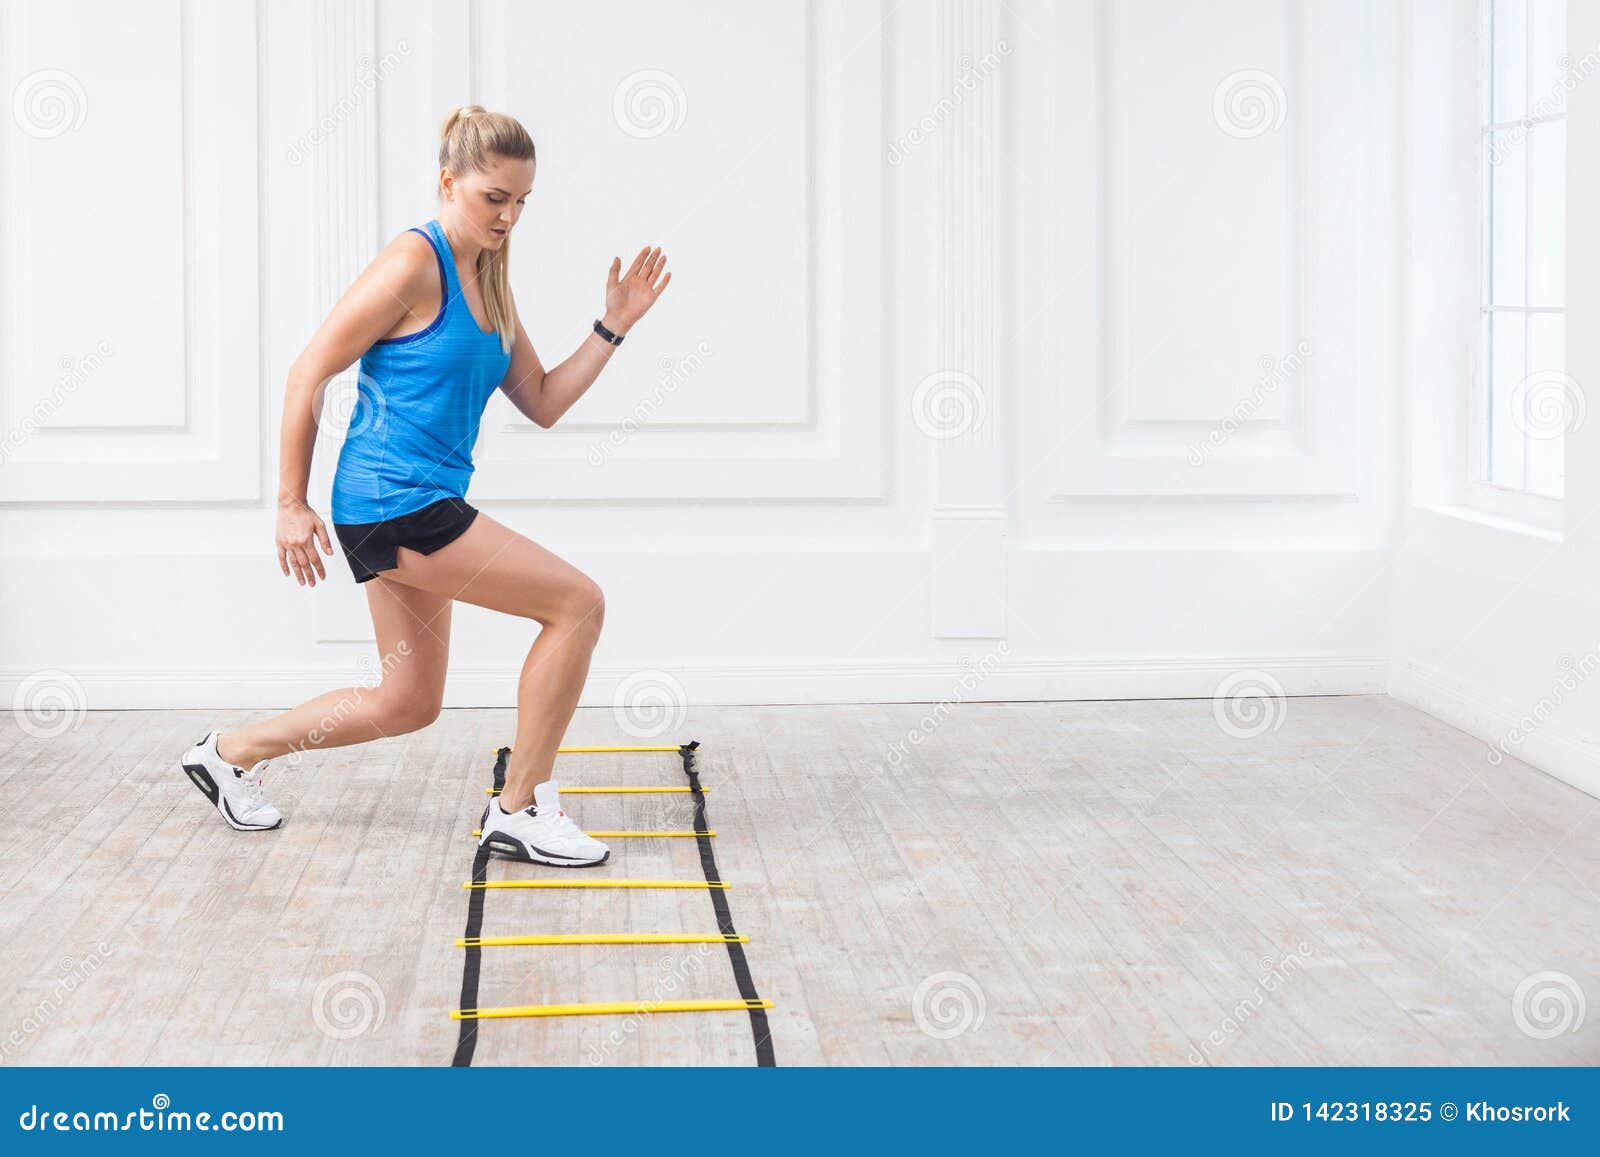 full length of sporty beautiful young athletic blonde woman in black shorts and blue top are hard working and training on agility